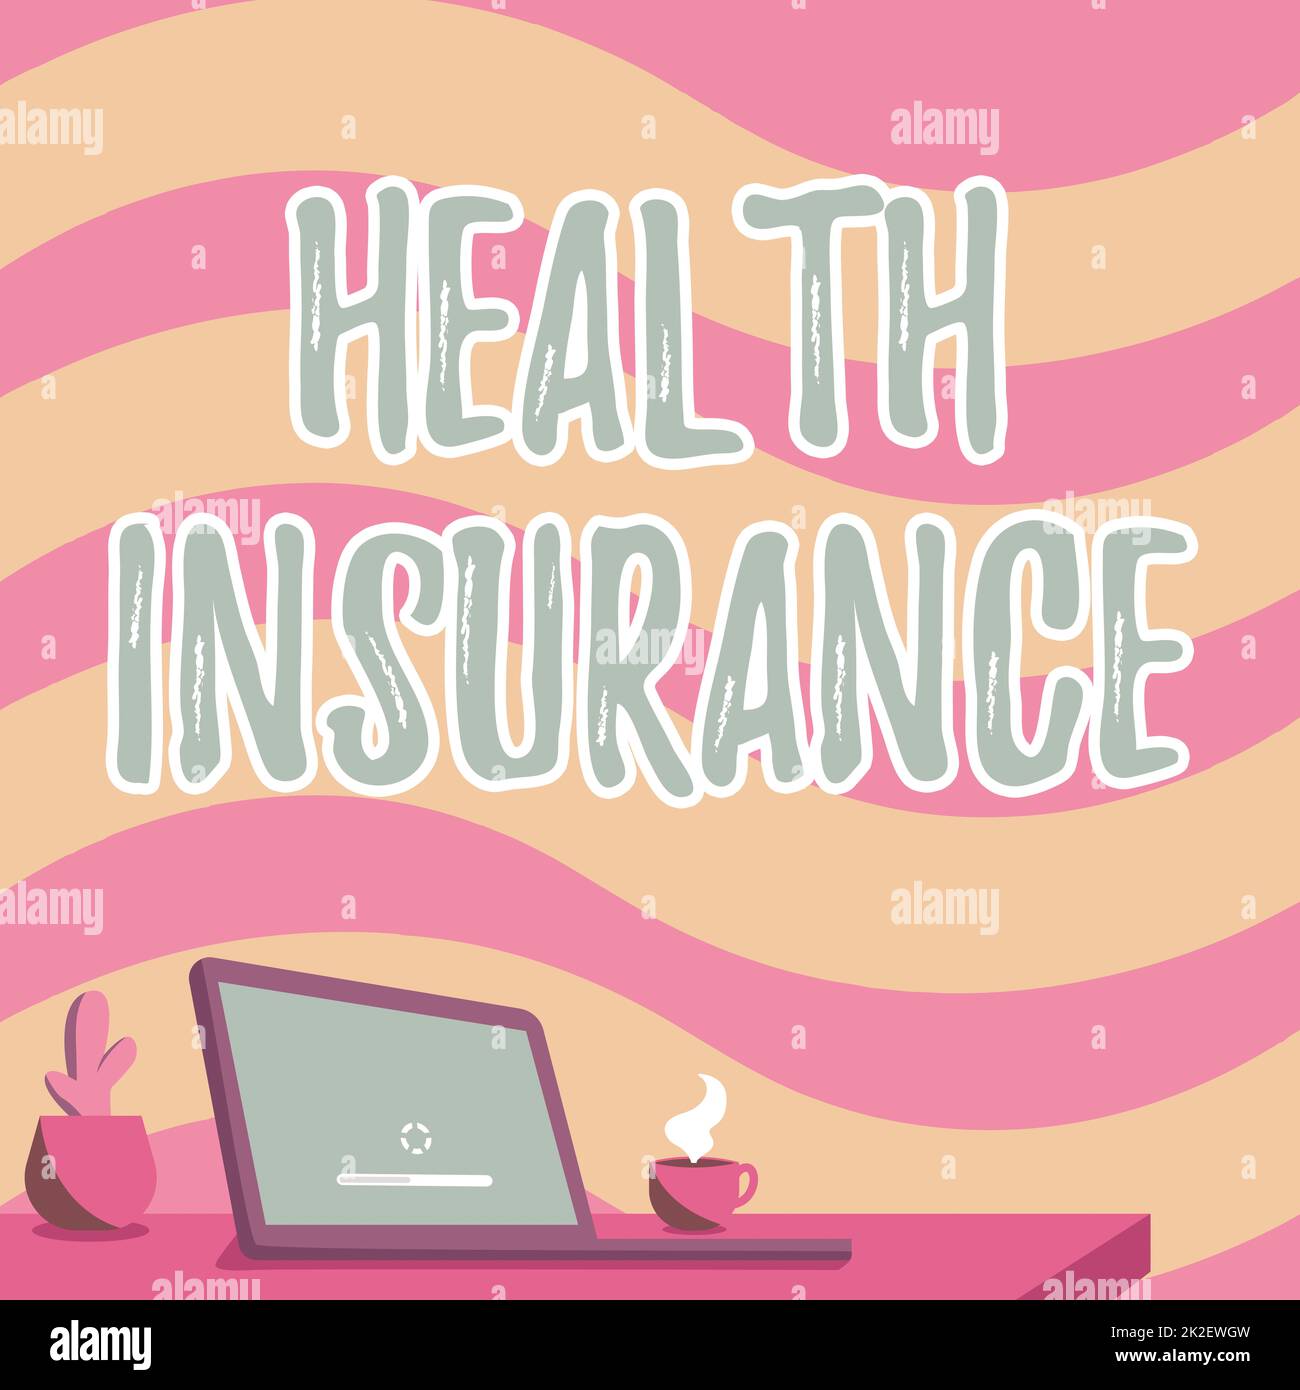 Writing displaying text Health Insurance. Word Written on coveragethat pays for medicaland surgical expenses Office Desk Drawing With Laptop Pen Holder And An Open And Arranged Stock Photo